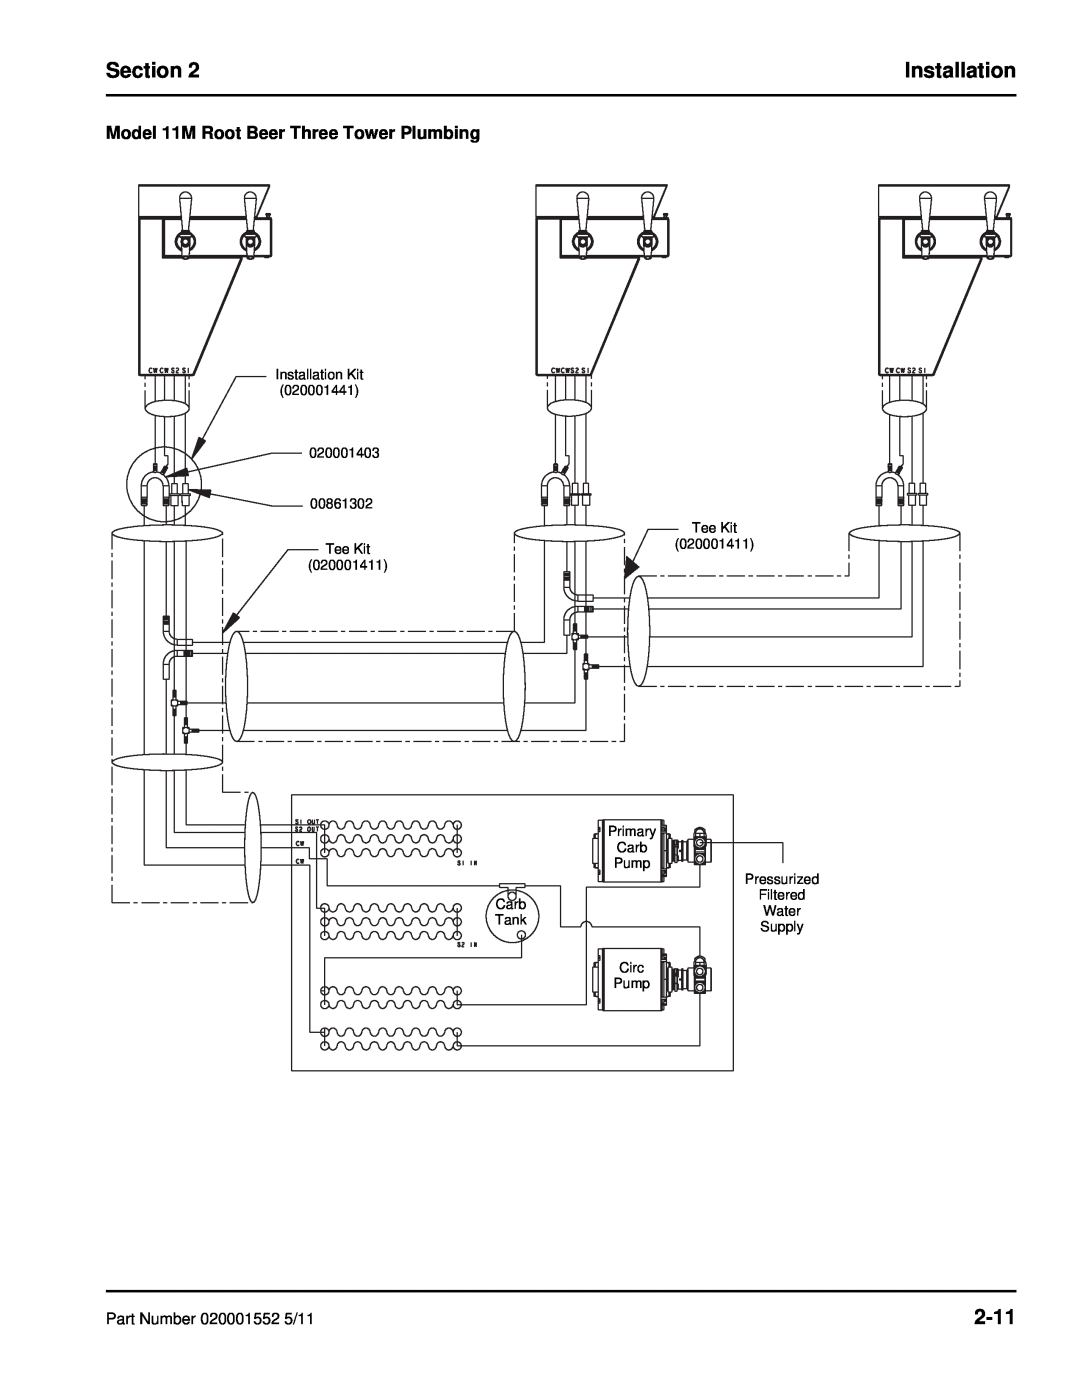 Manitowoc Ice manual 2-11, Model 11M Root Beer Three Tower Plumbing, Section, Installation 